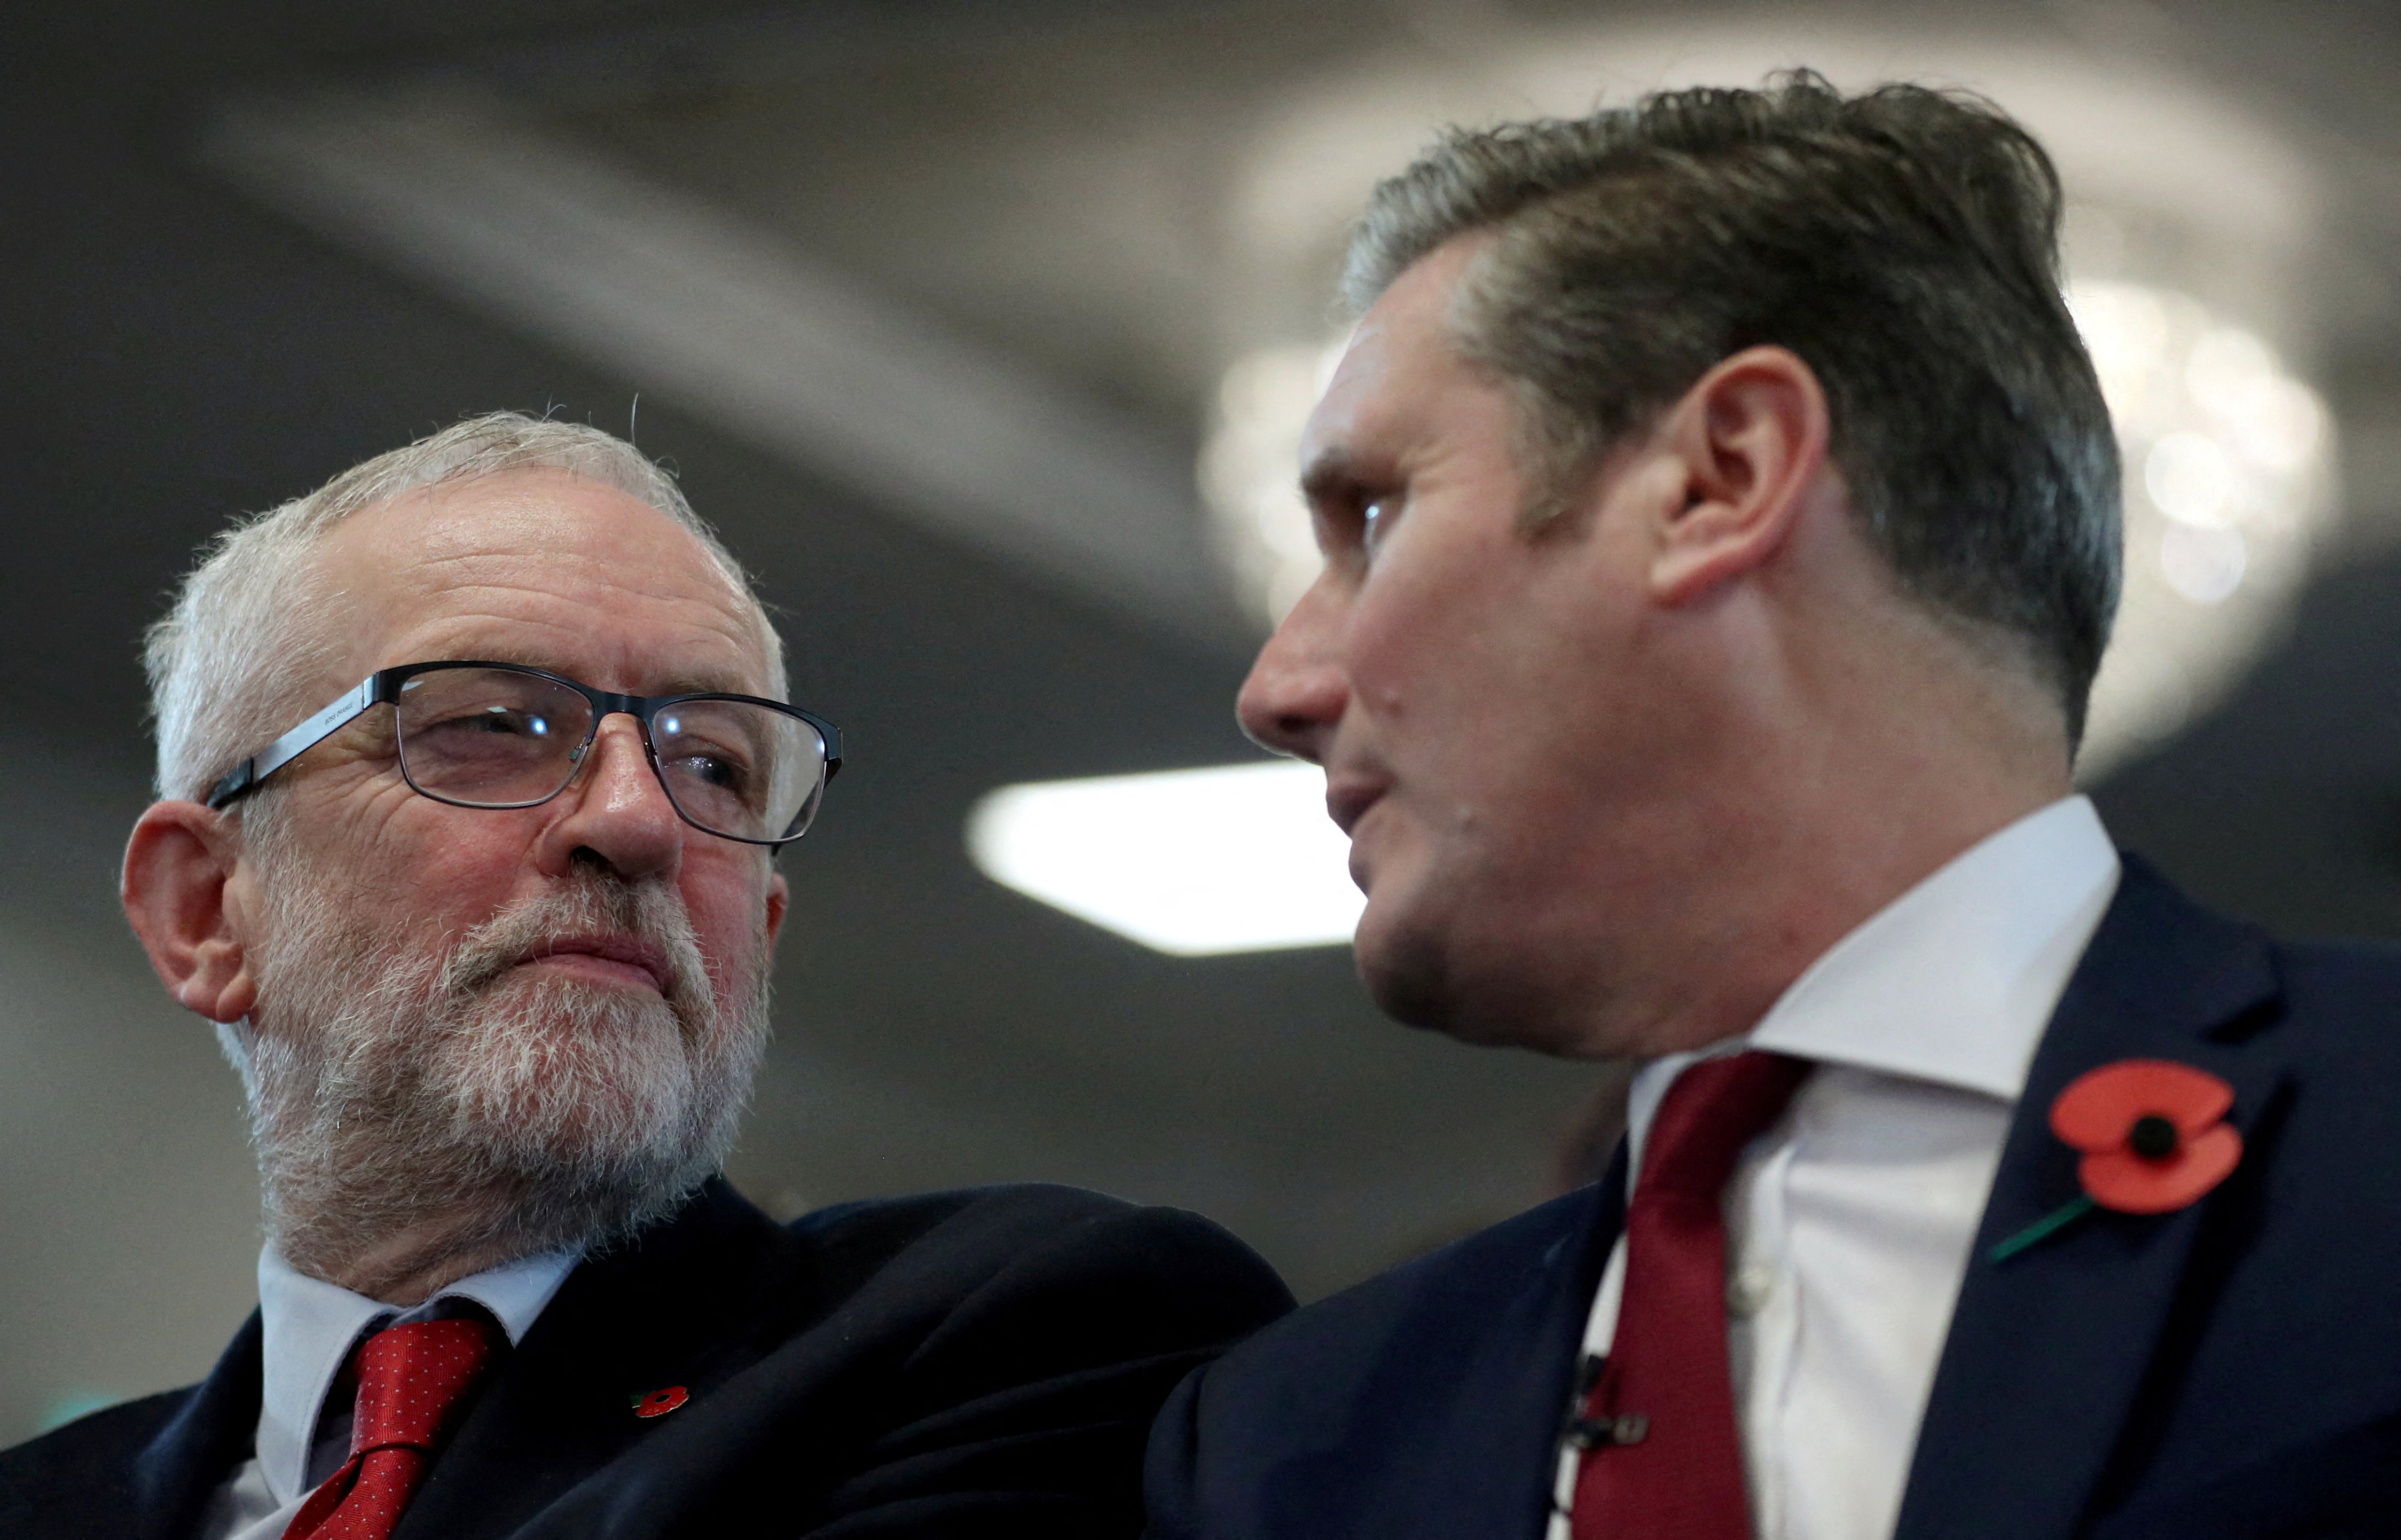 Starmer’s speech only reminds us of the qualities we know about the man being purged